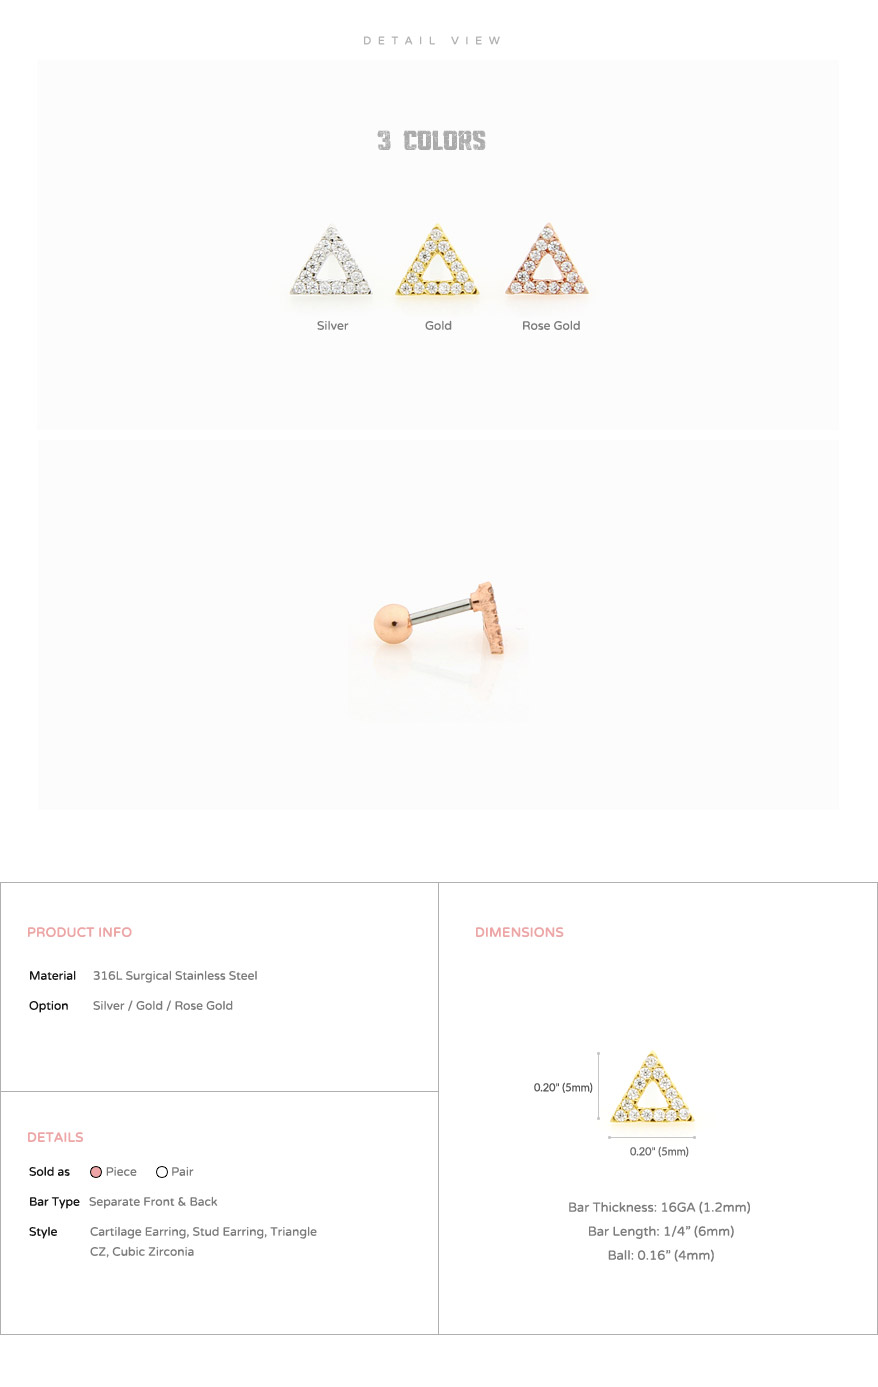 ear_studs_piercing_cartilage_earrings_16g_316l_surgical_stainless_steel_jewelry_barbell_rose_gold_helix_conch_labret_triangle_5